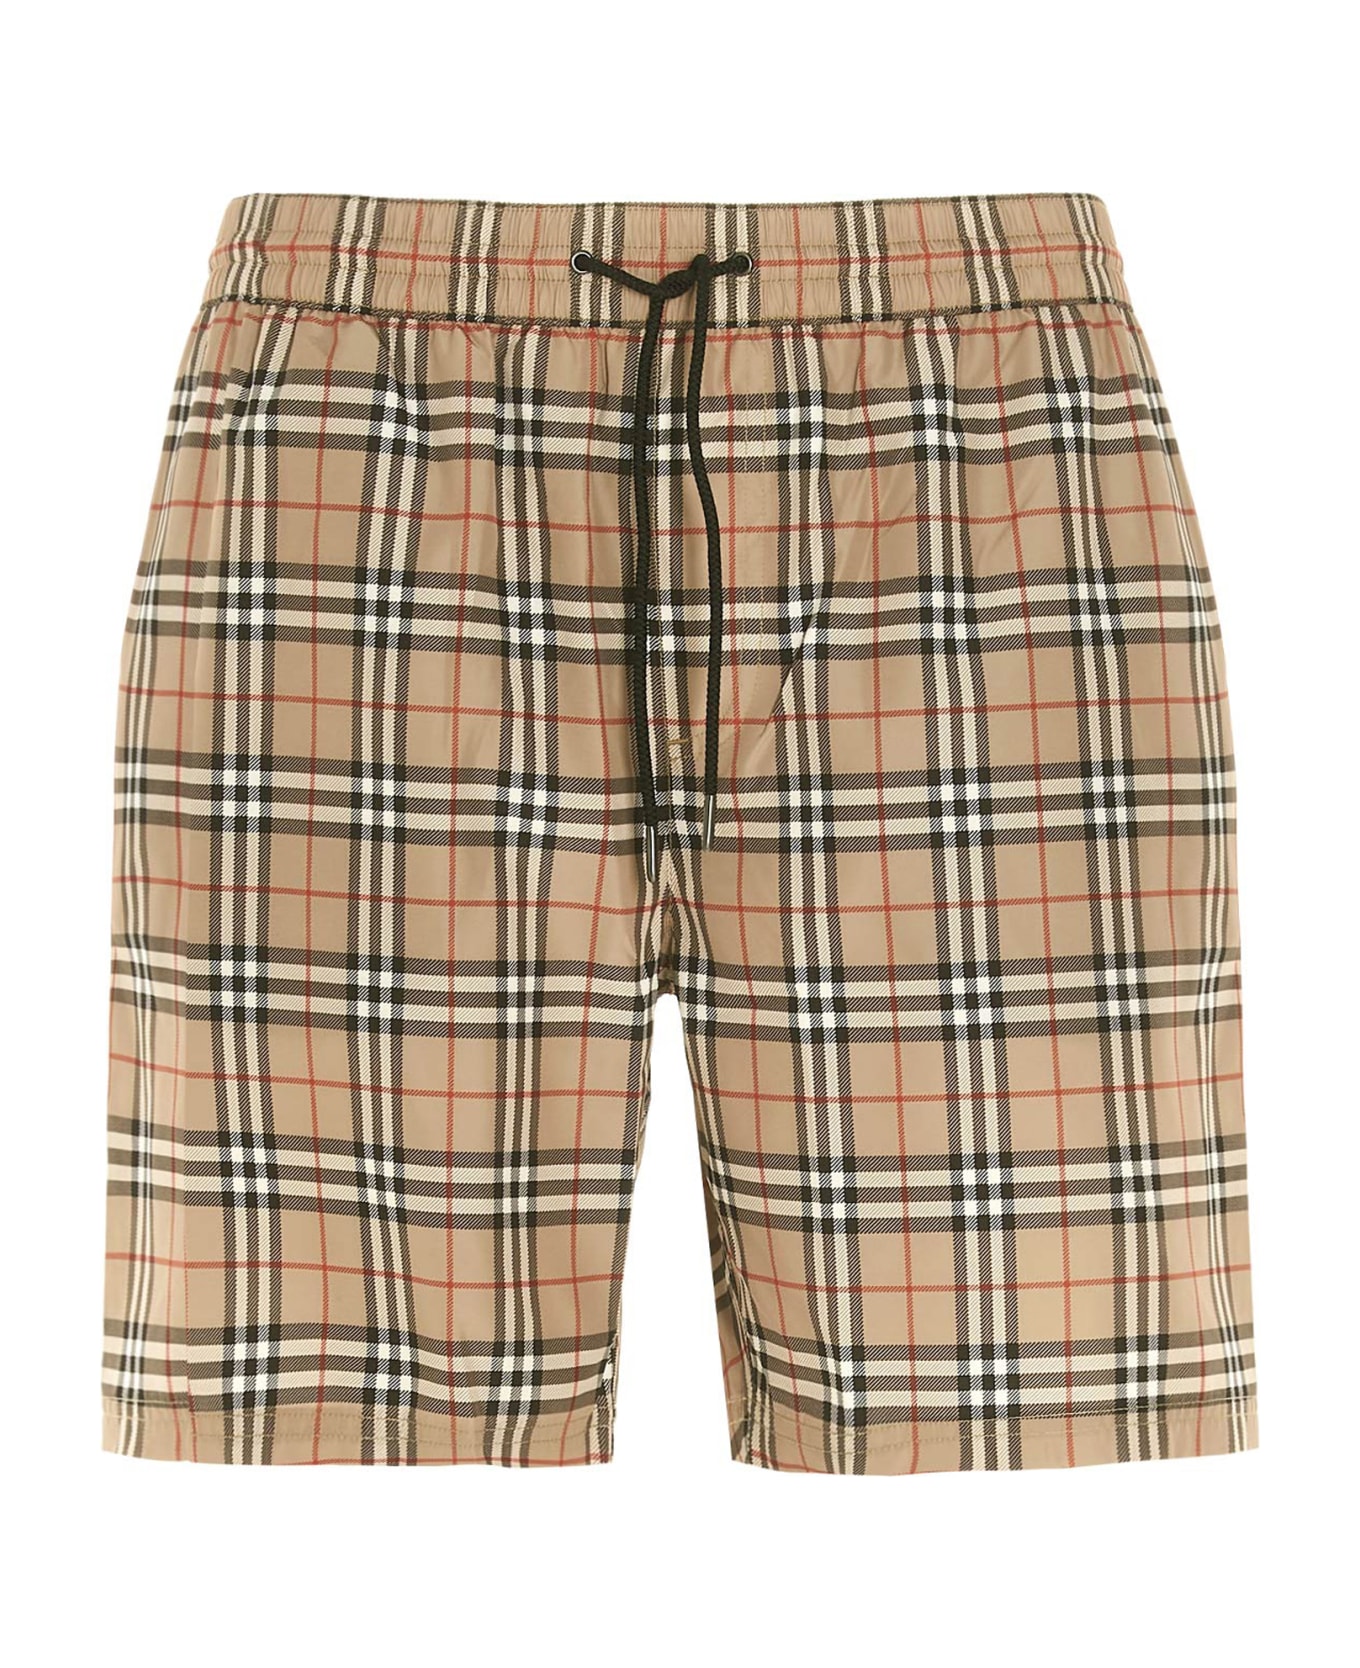 Burberry 'guildes' Swimming Trunks - Beige